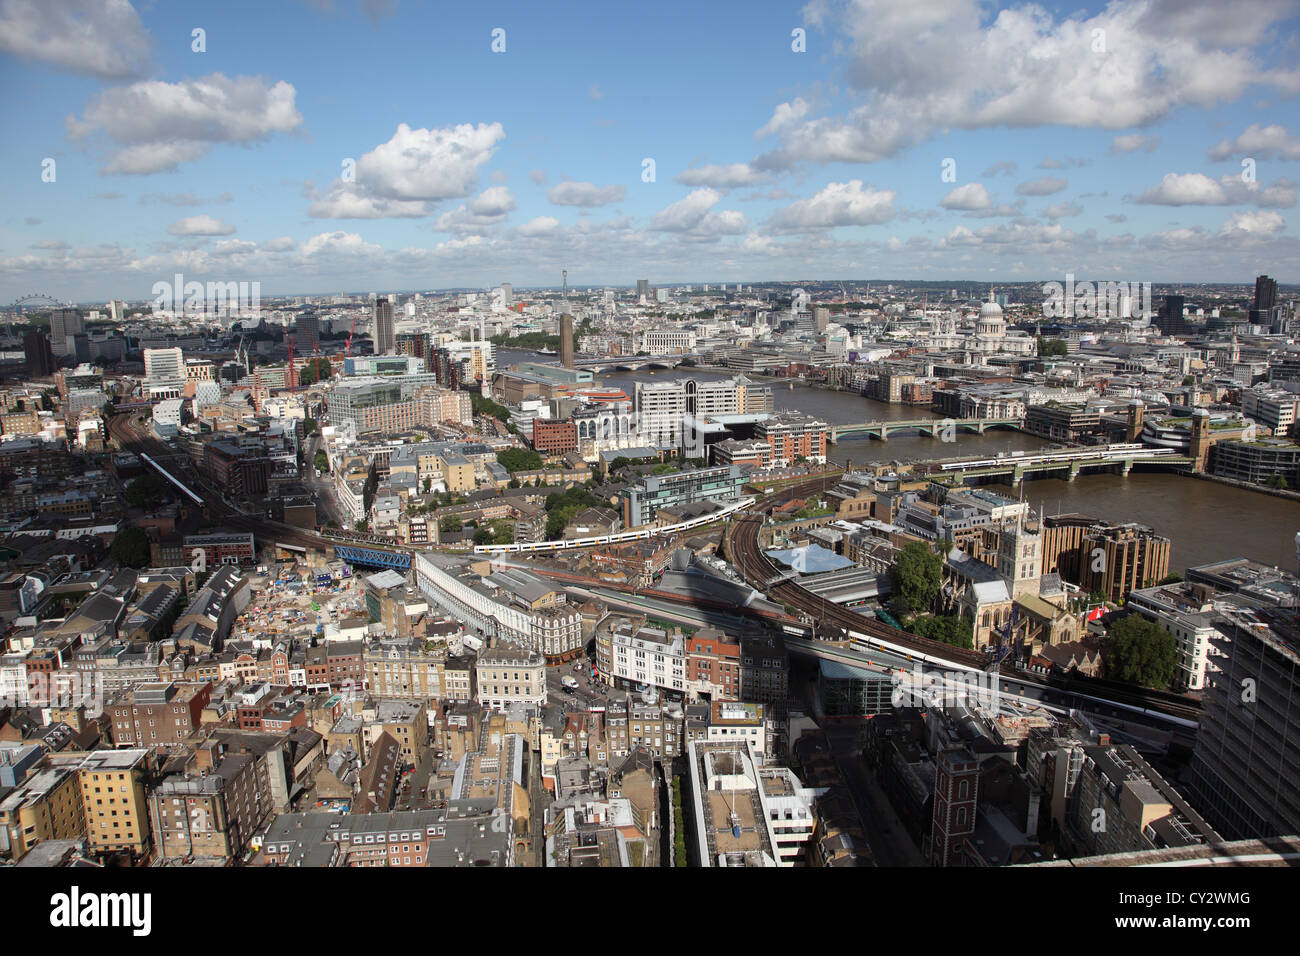 Aerial view of London from the top of Guy's Hospital, adjacent to the Shard. Shows River Thames, Bermondsey and Southwark. Stock Photo